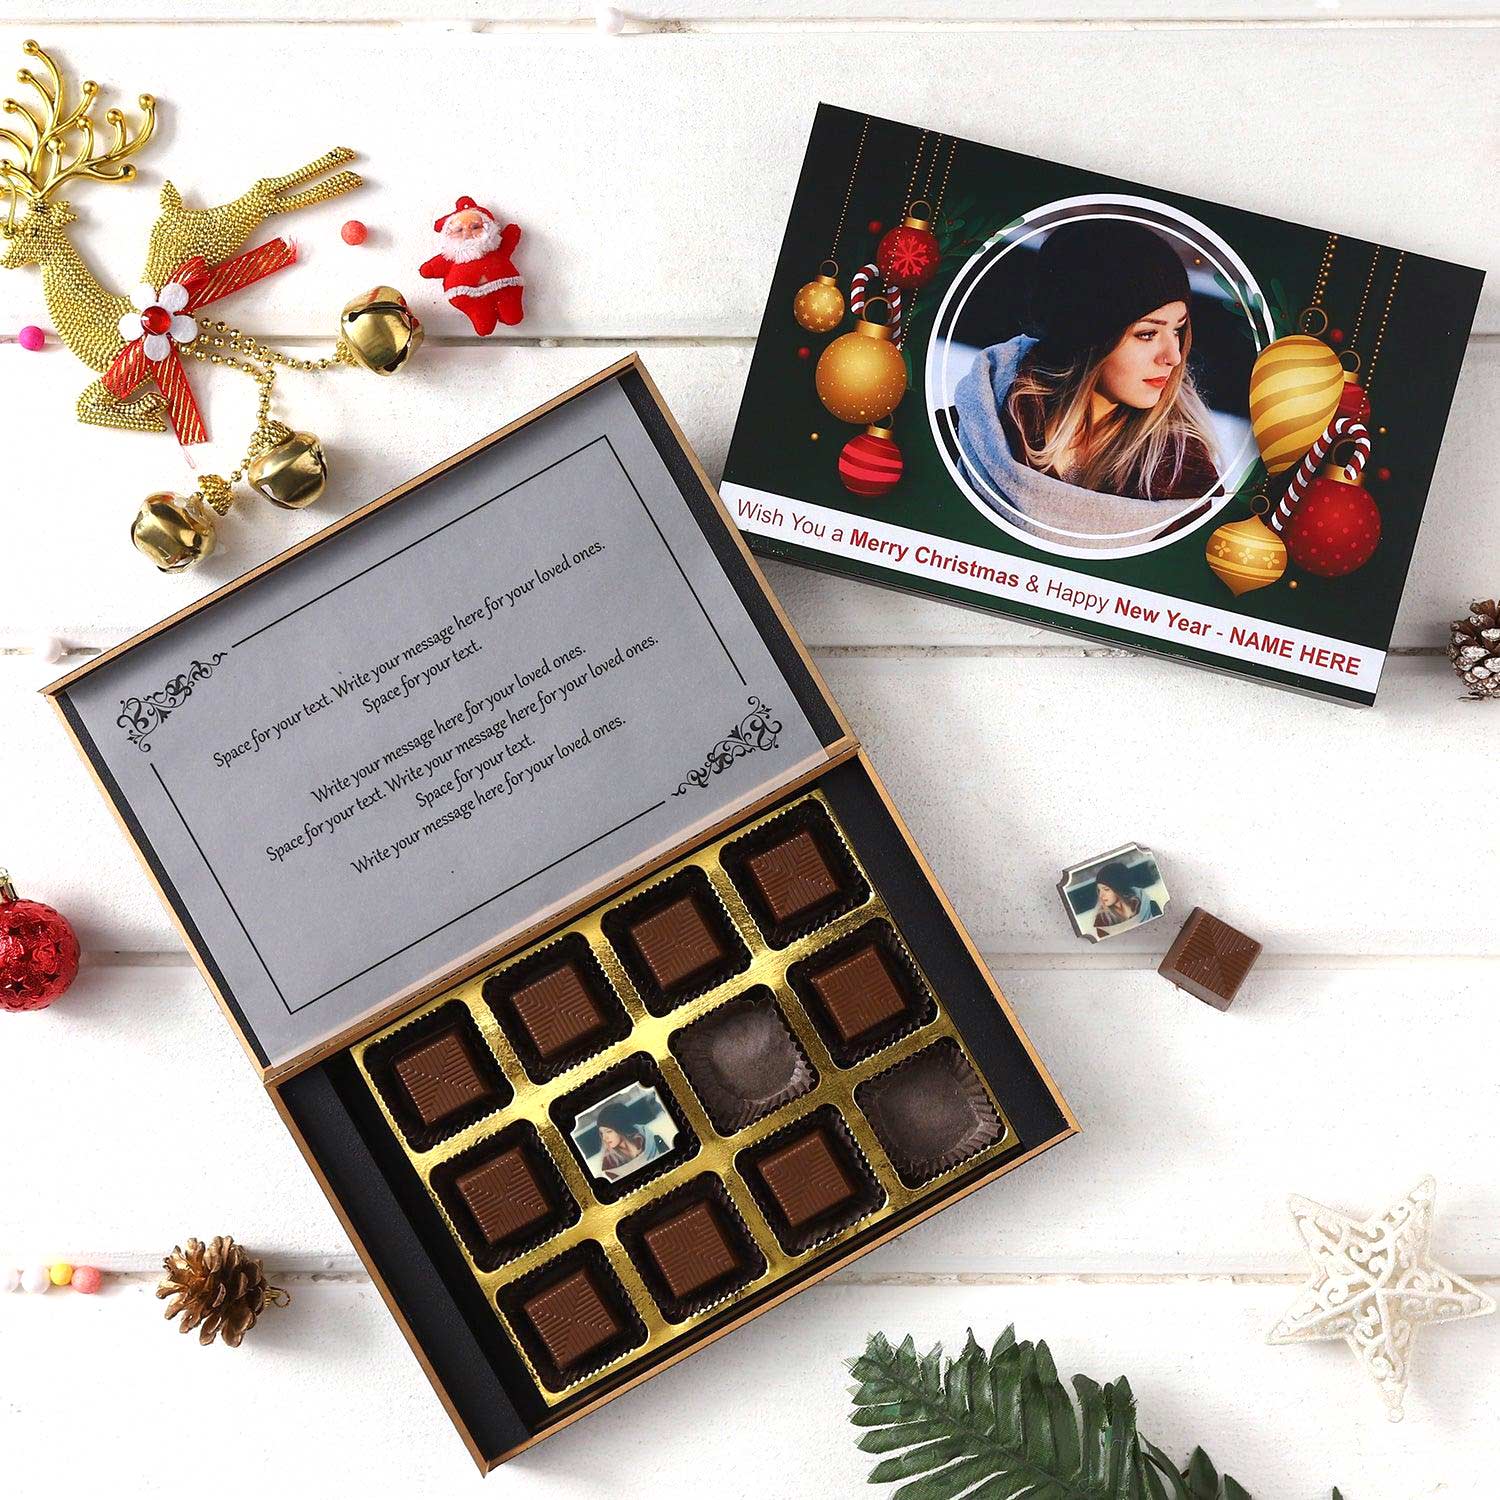 Personalized Photo Chocolate Gift for New Year and Merry Christmas with Print Photo Name and Message